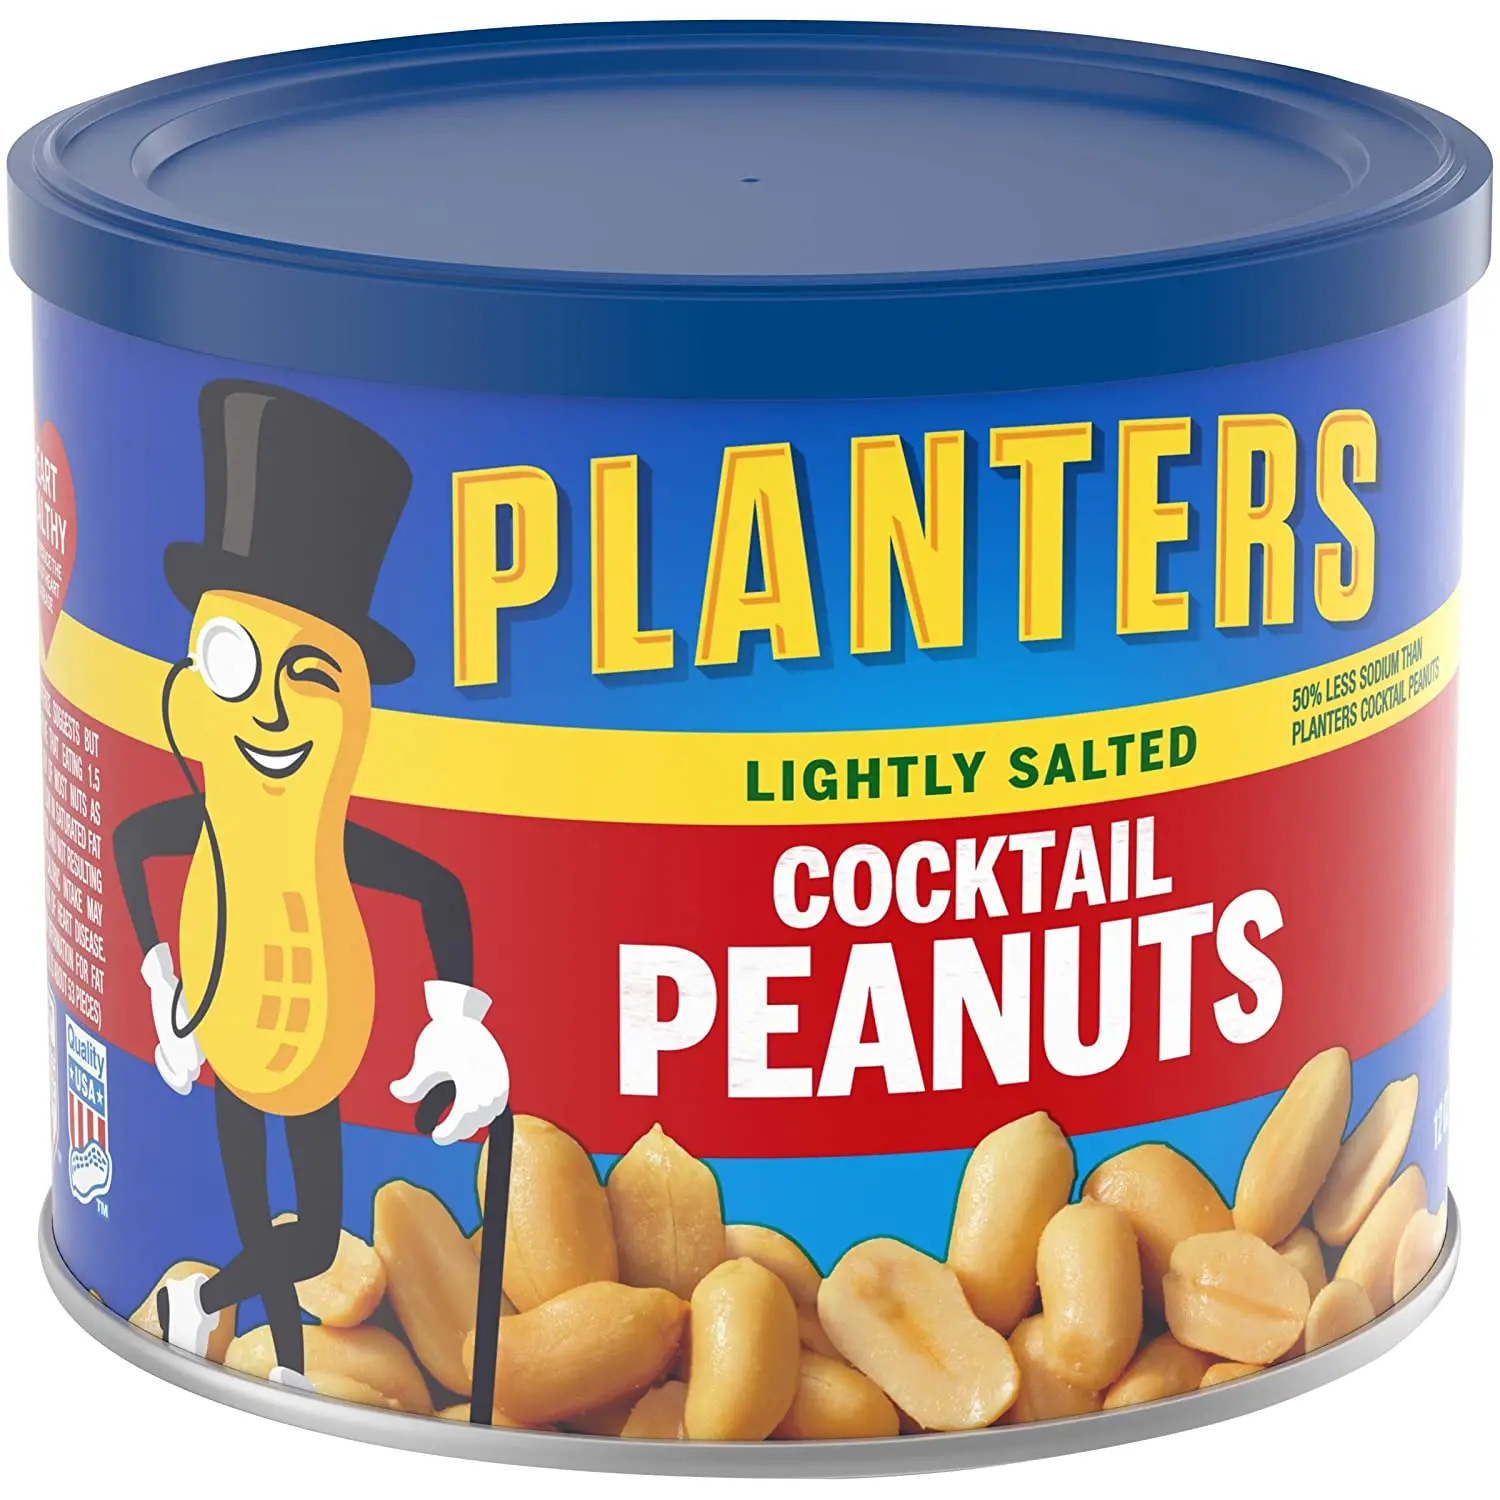 Planters Cocktail Peanuts 12 oz Can (Pack of 6)